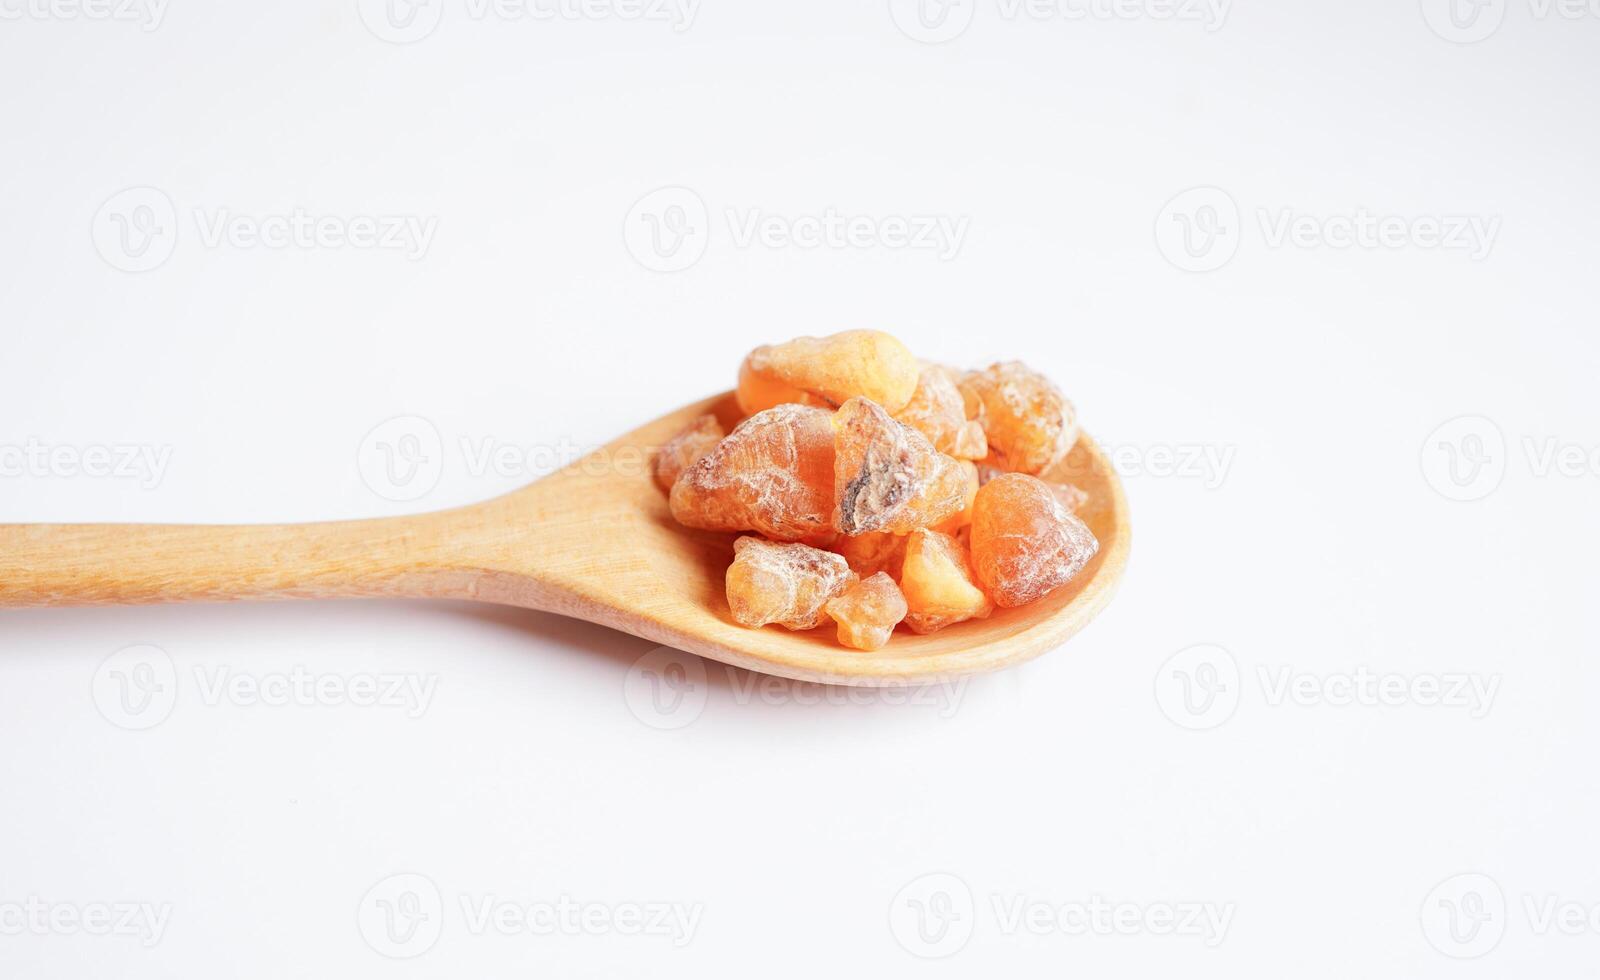 Frankincense or olibanum aromatic resin used in incense and perfumes. photo